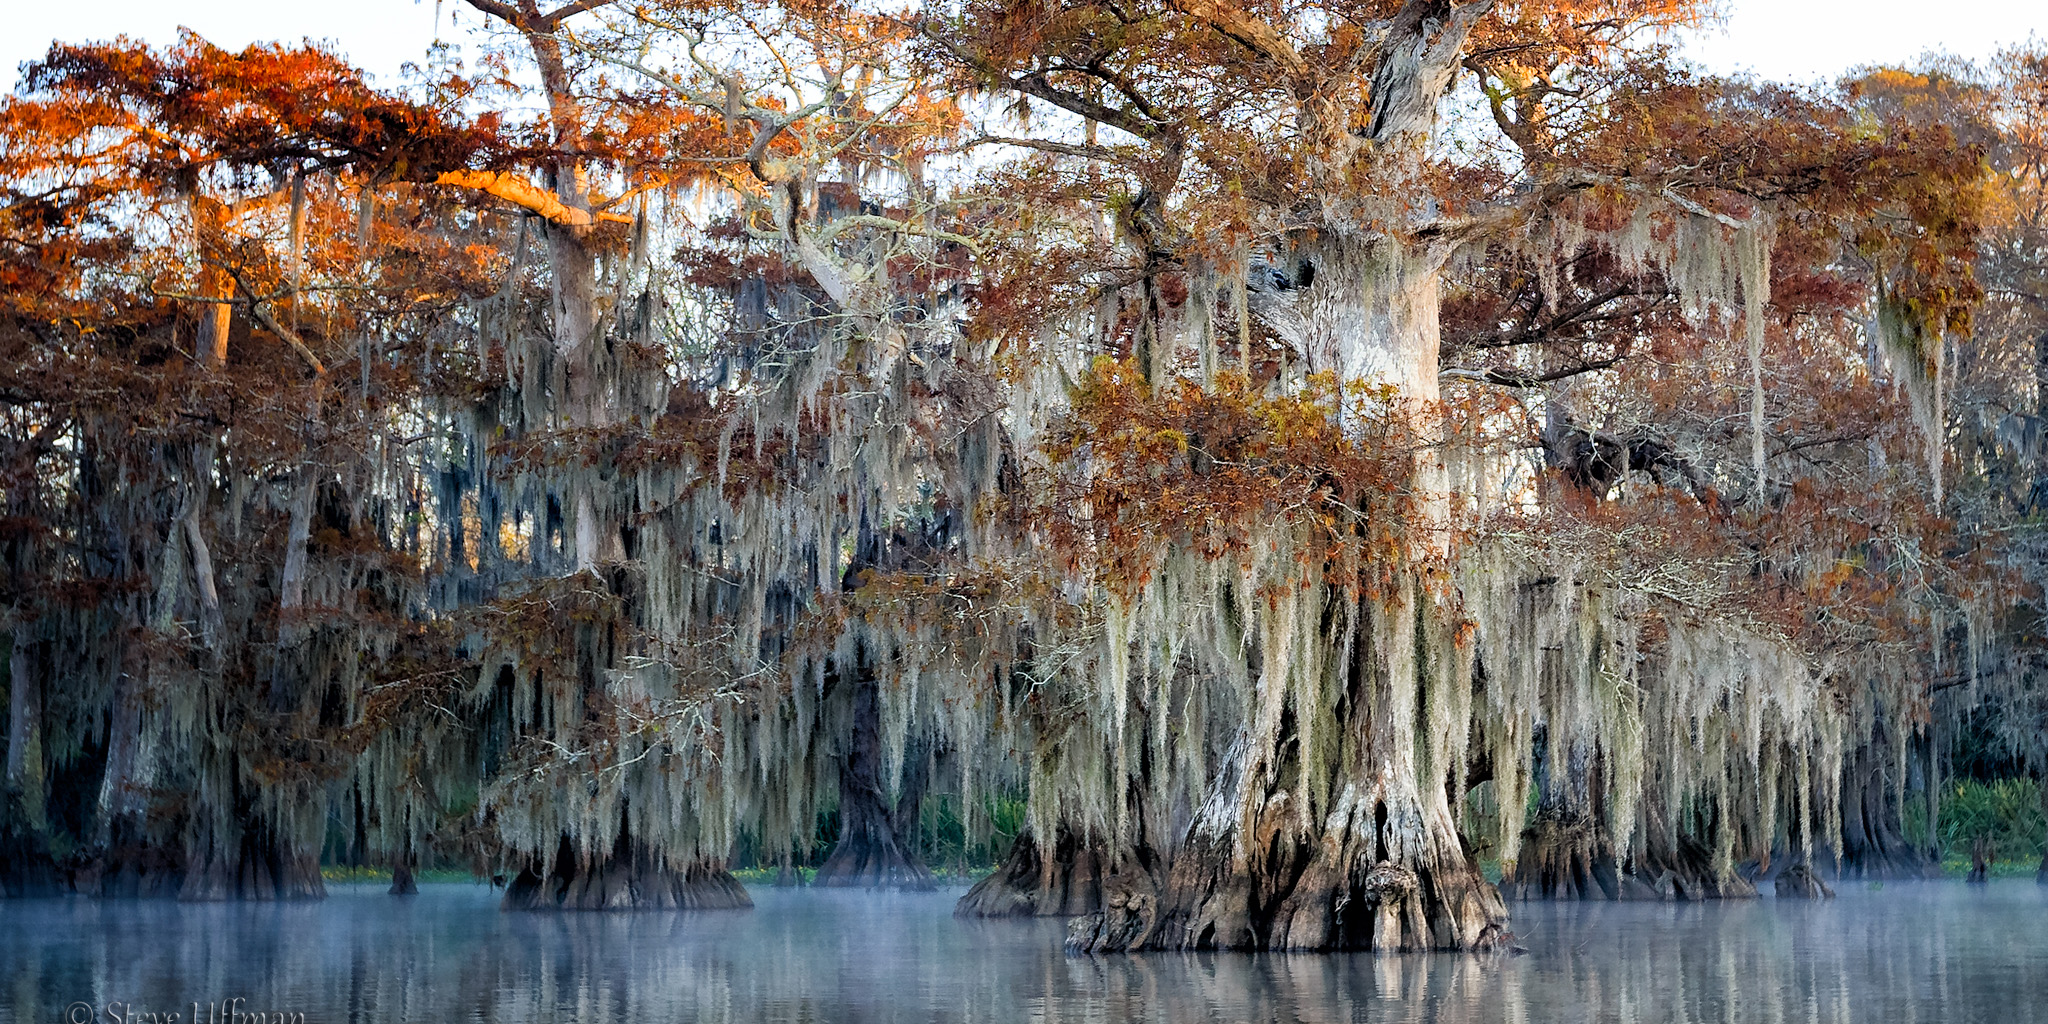 Photographic Master Class Swamp Tours In Louisiana